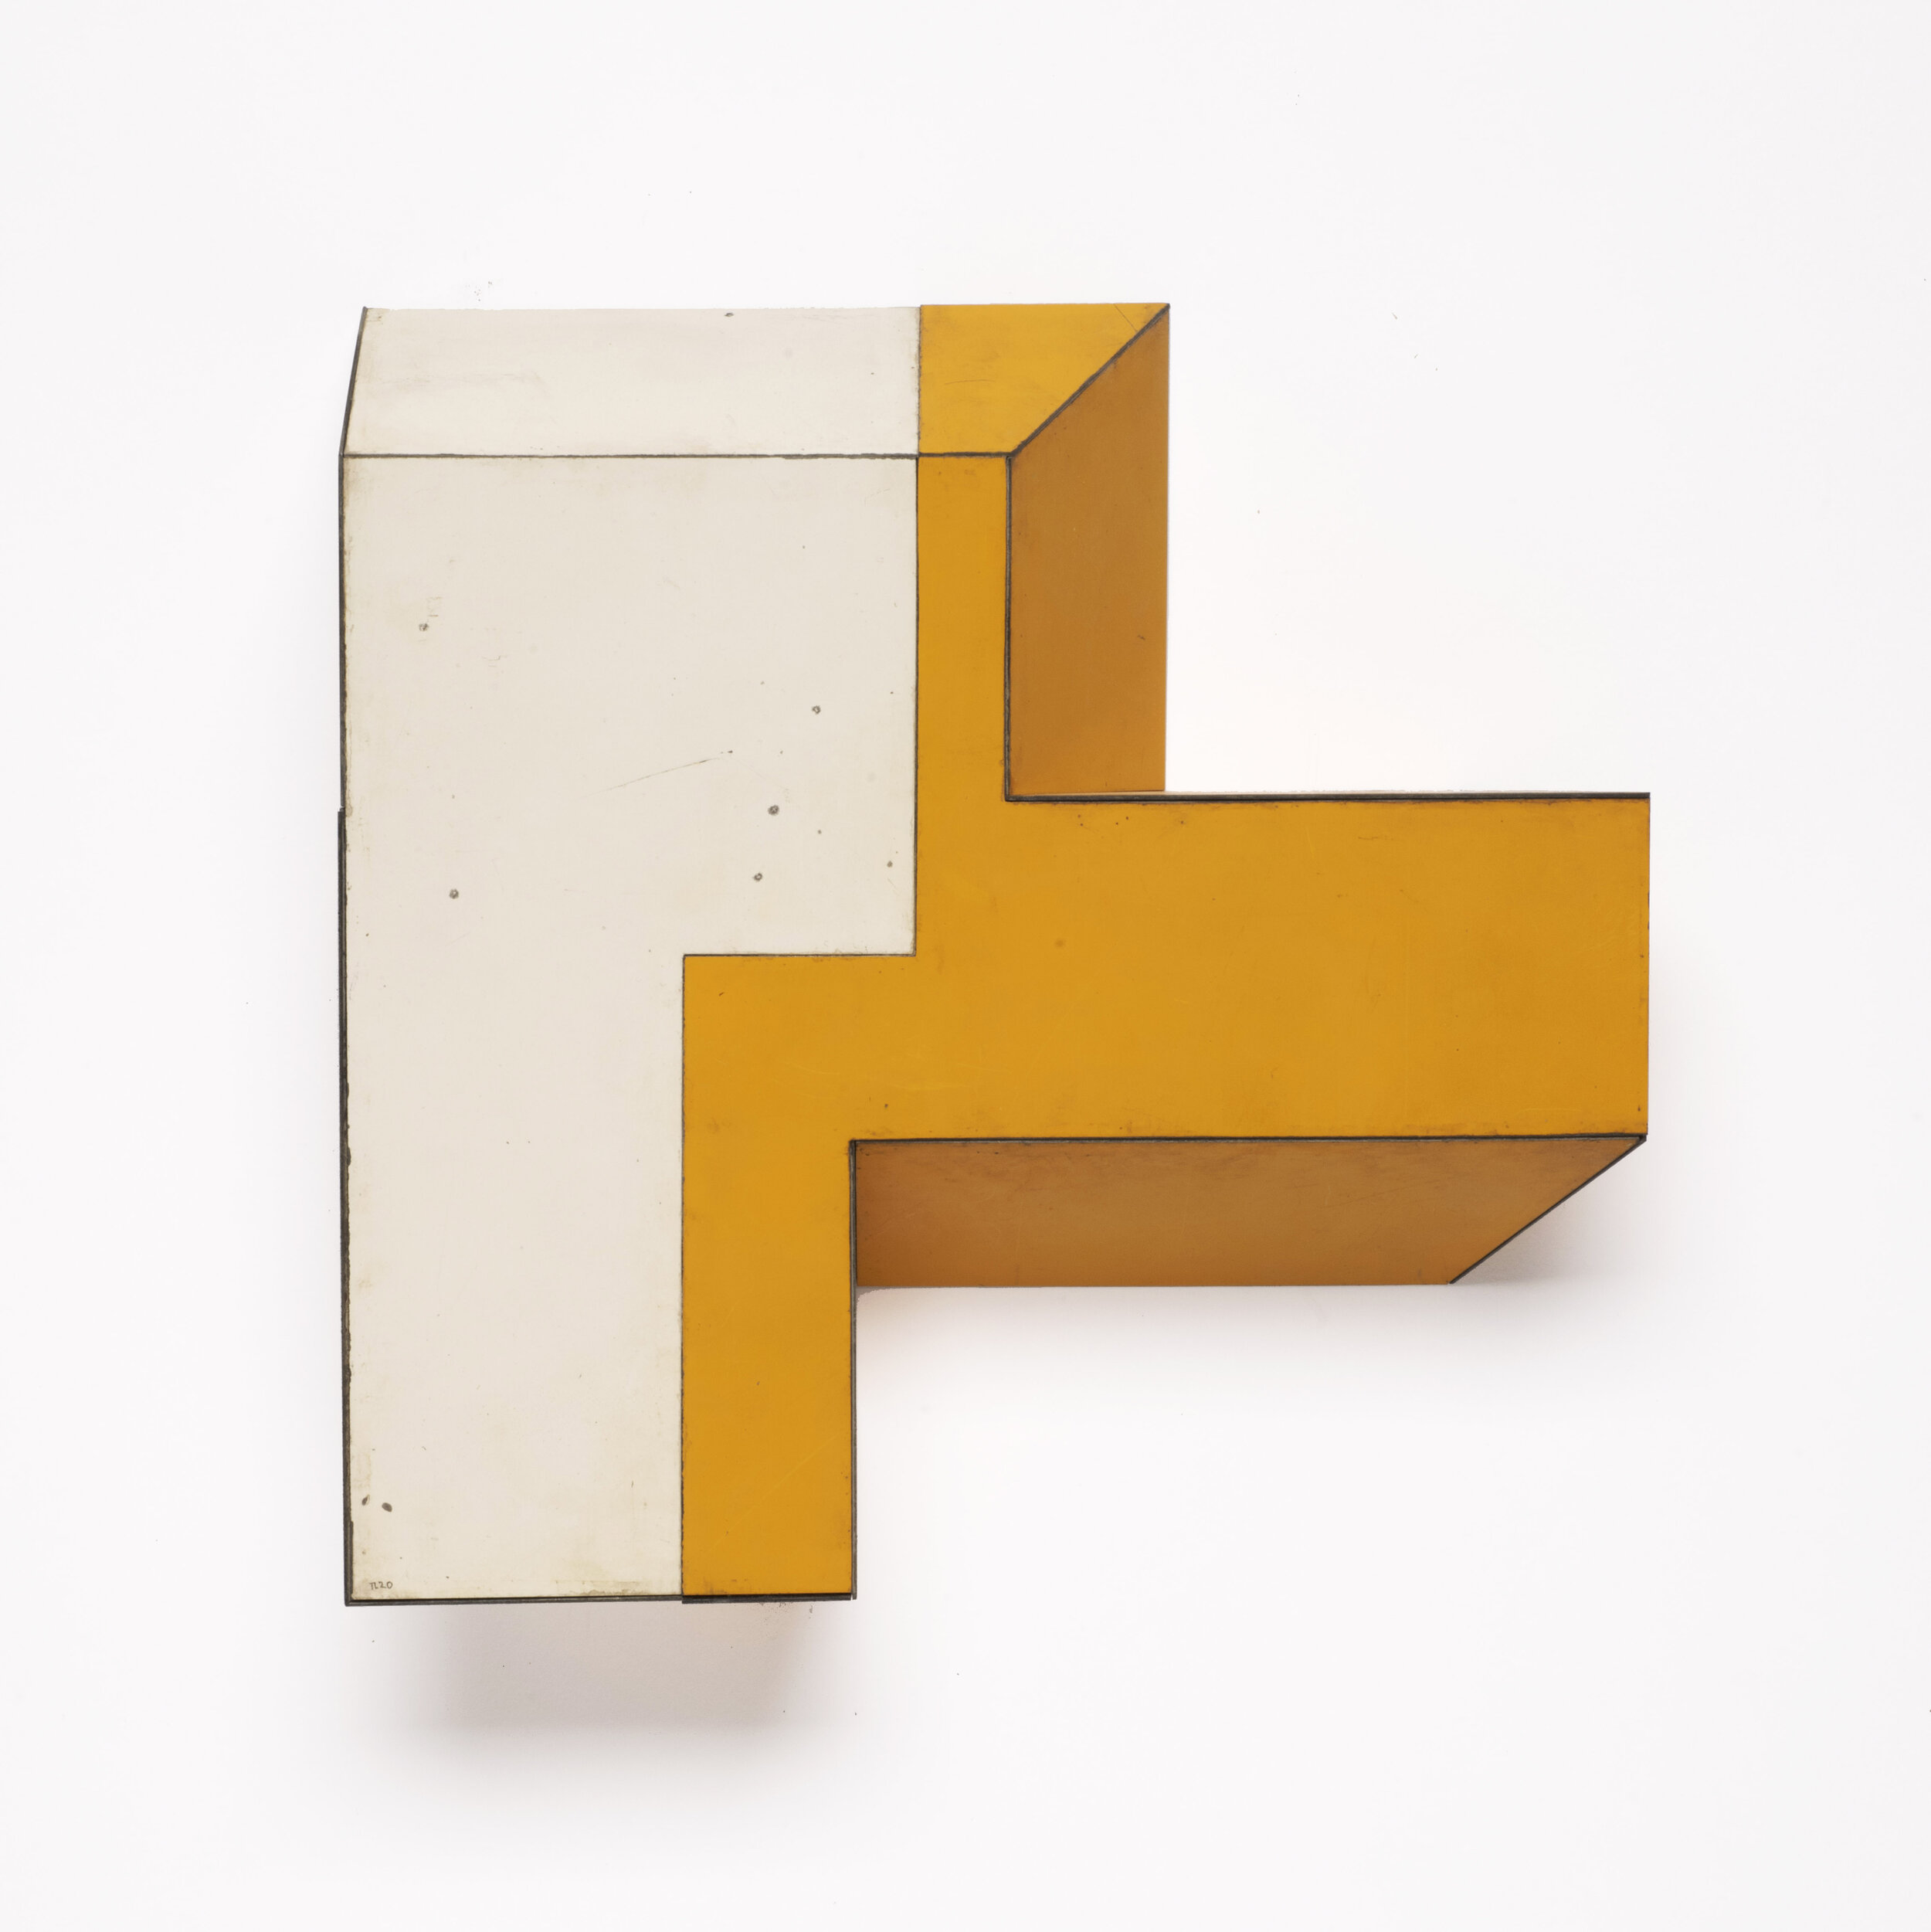 LARGER HALF | 10 x 10 x 2.25 in / 25.5 x 25.5 x 5.75 cm, salvage steel, marine-grade plywood, silicone, vulcanized rubber, hardware, 2020